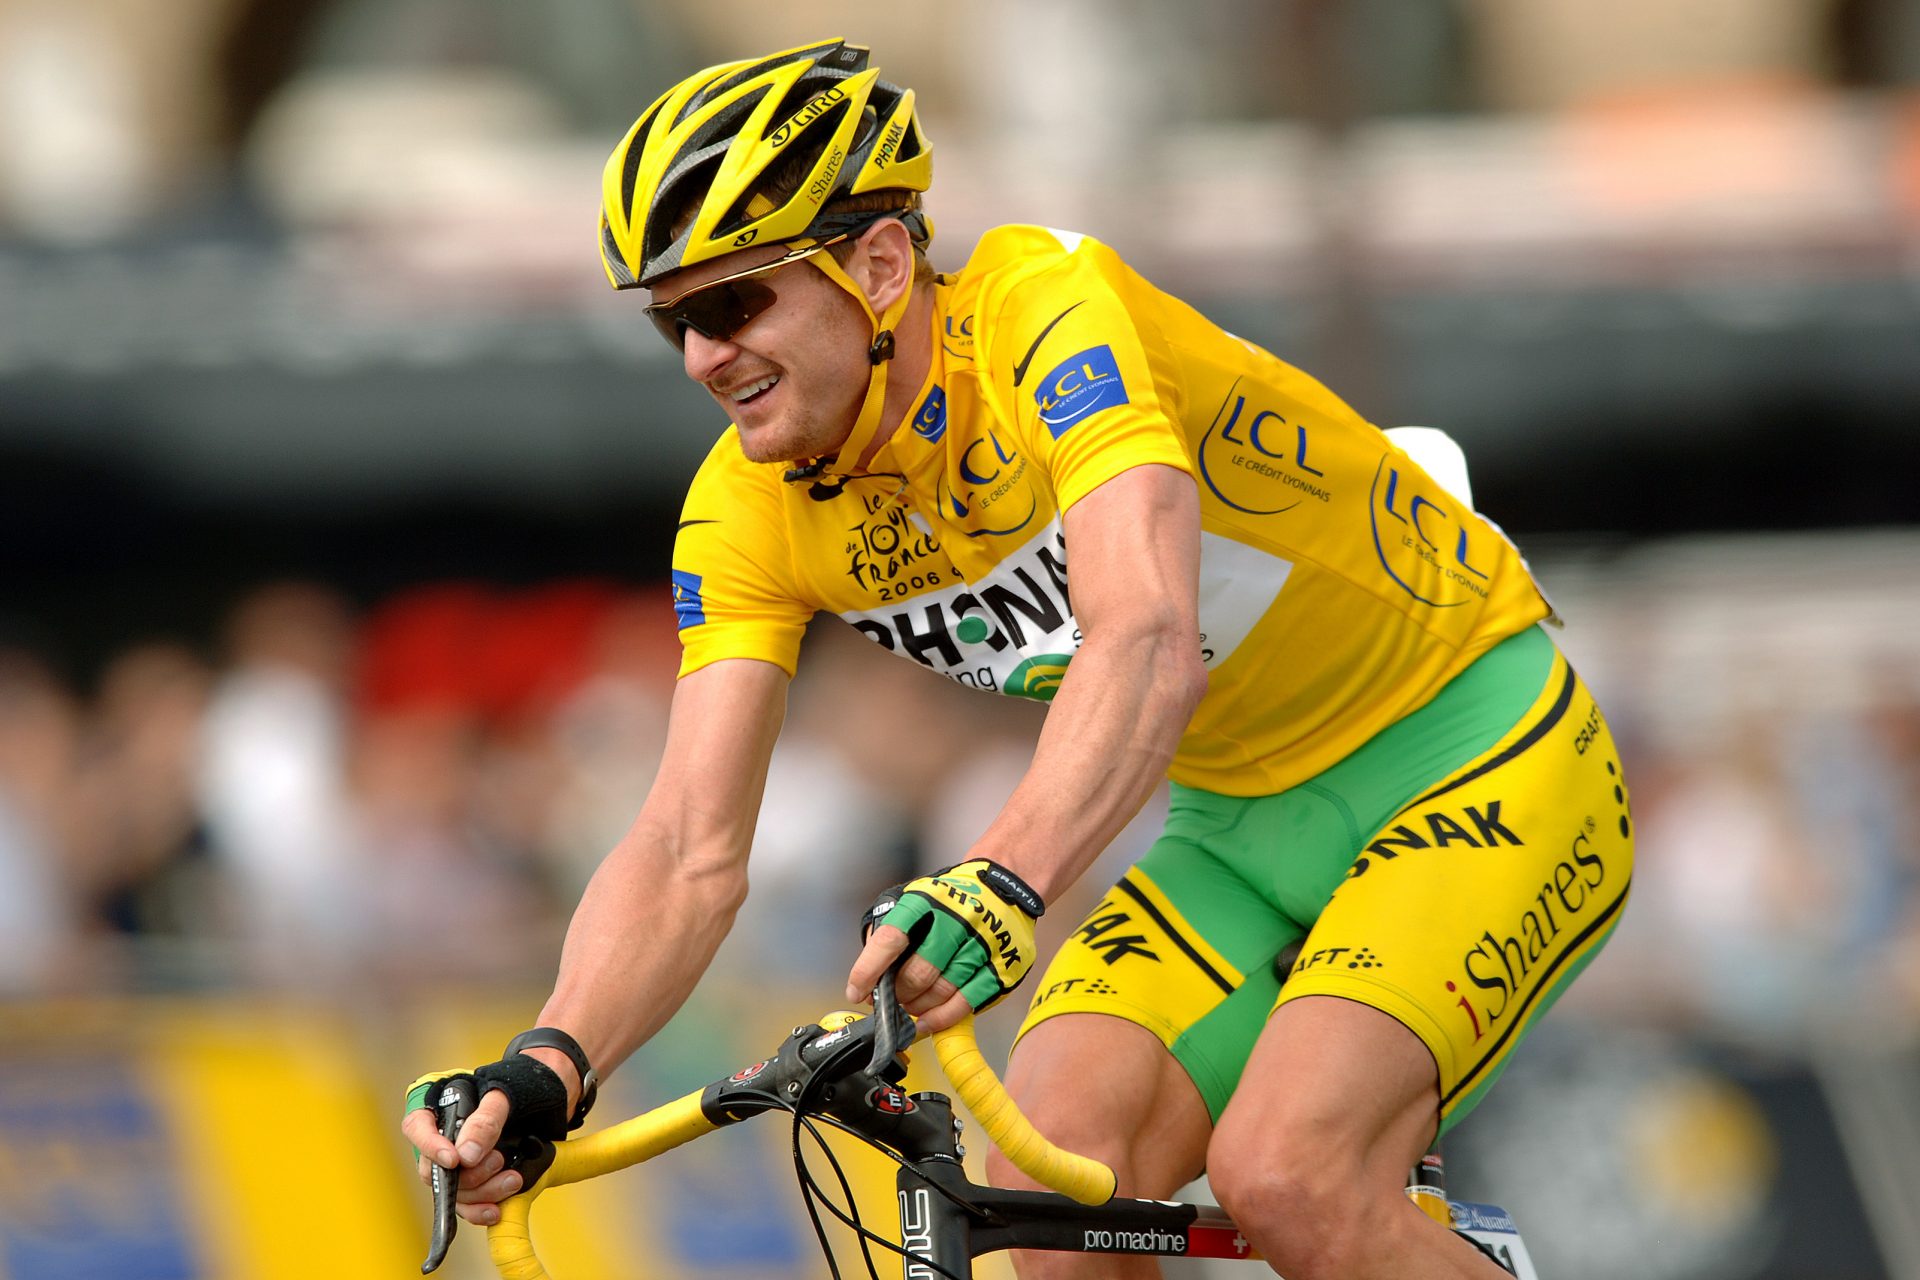 Floyd Landis: The cycling whistleblower who brought down Lance Armstrong